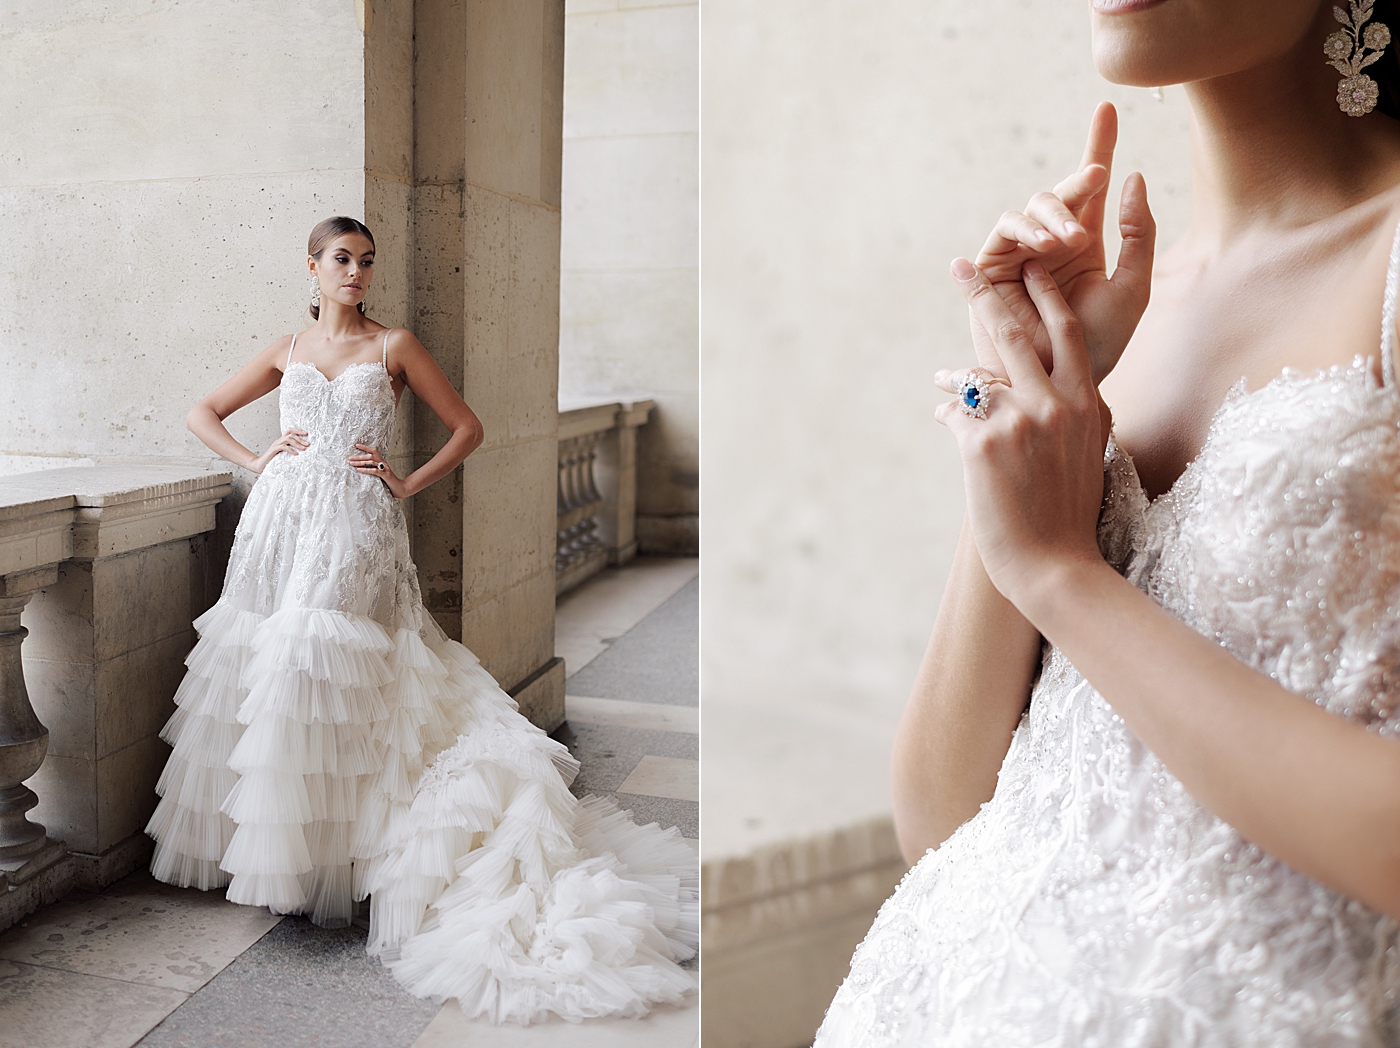 Side by side images of a bride in a wedding dress posing against a concrete pillar with engagement ring details | Image by Hope Helmuth Photography